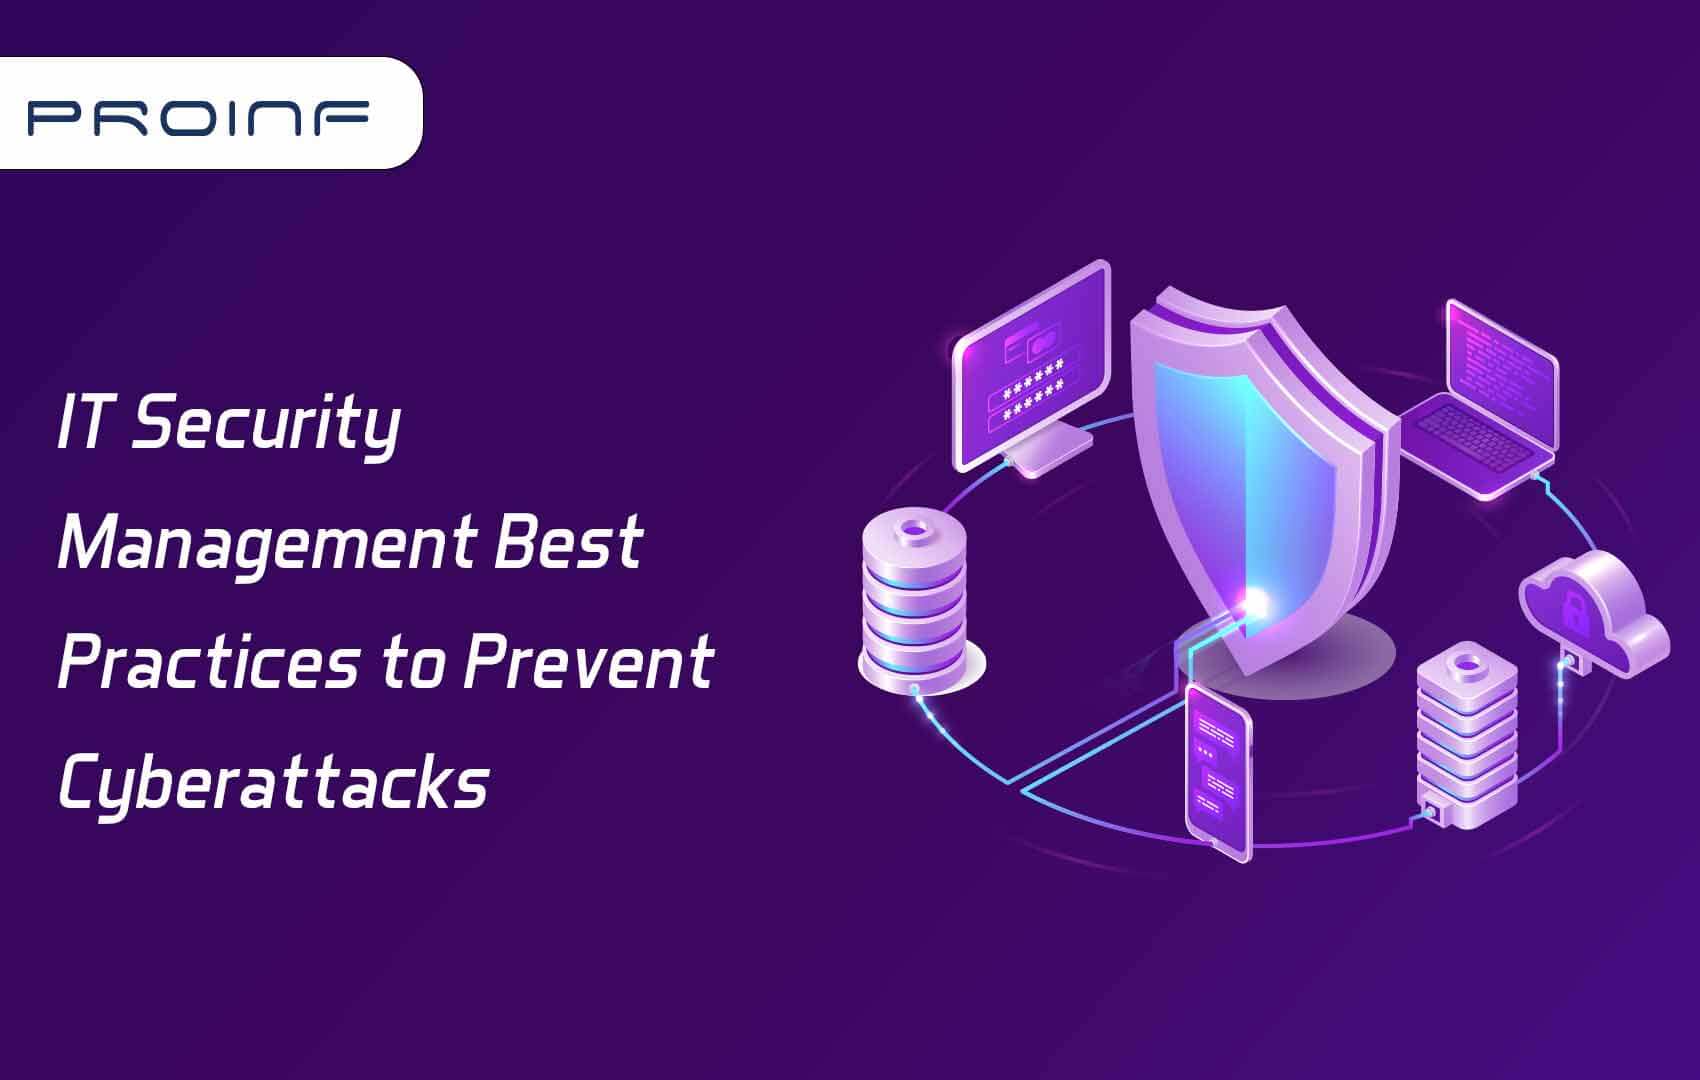 IT Security Management Best Practices to Prevent Cyberattacks